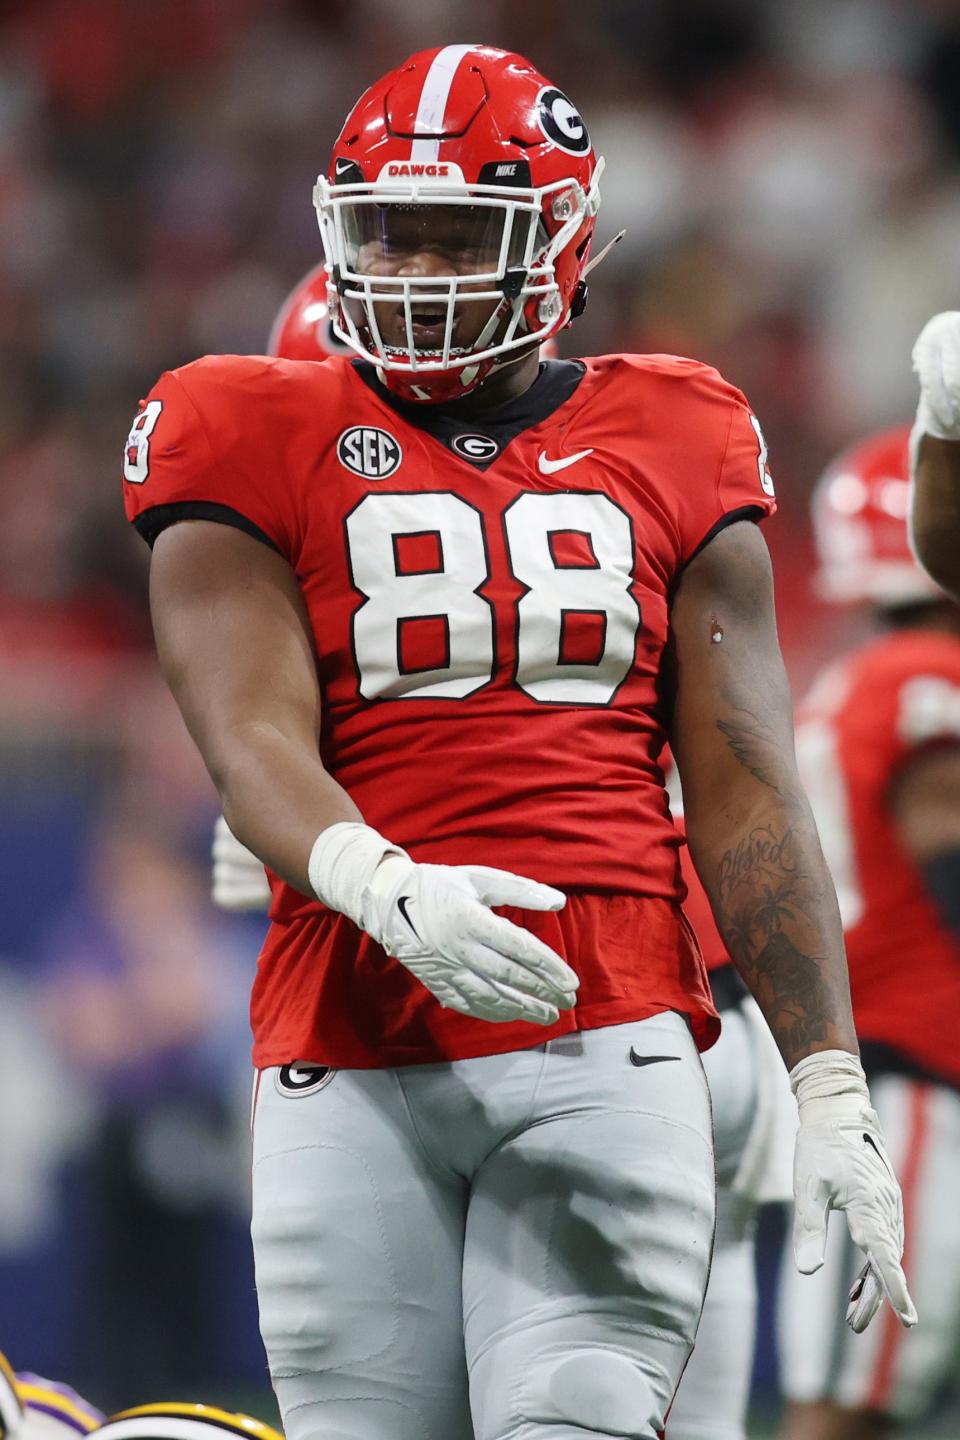 Georgia Bulldogs defensive lineman Jalen Carter is considered a top prospect in the upcoming NFL draft.